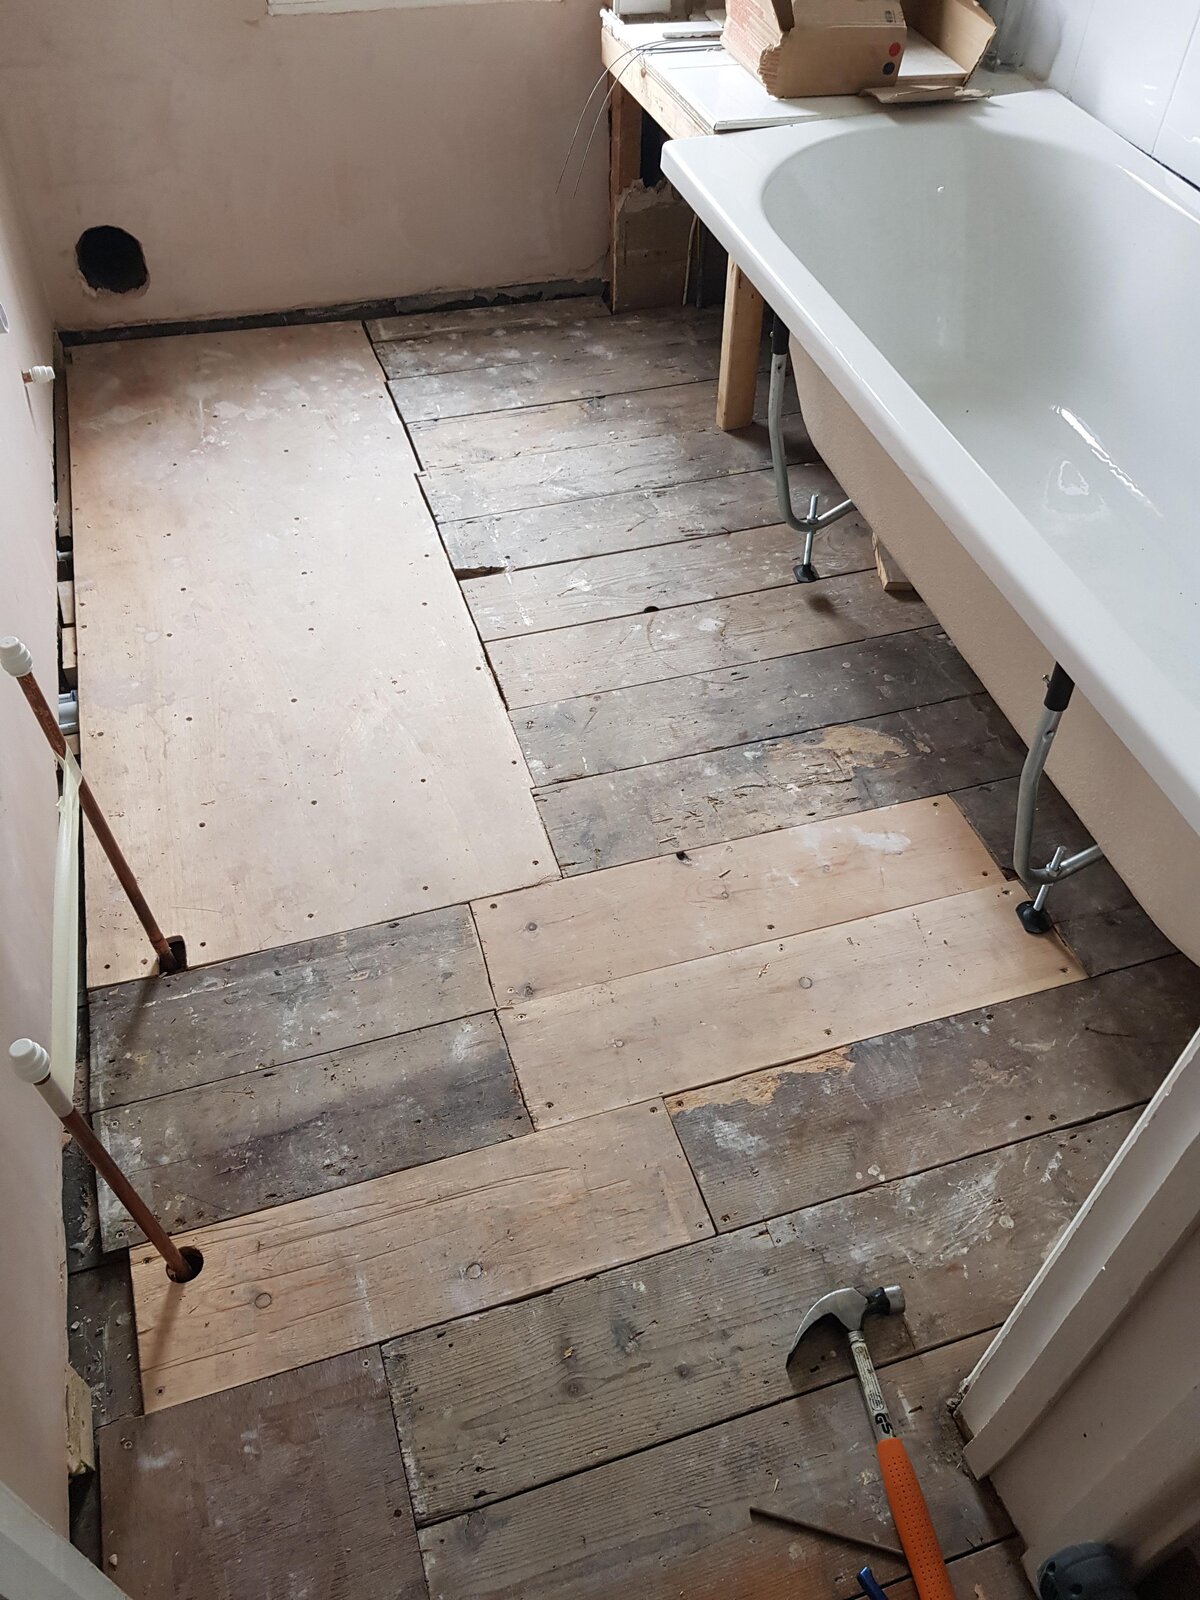 No More Ply On Old Floorboards, Plywood For Tiling Bathroom Floors